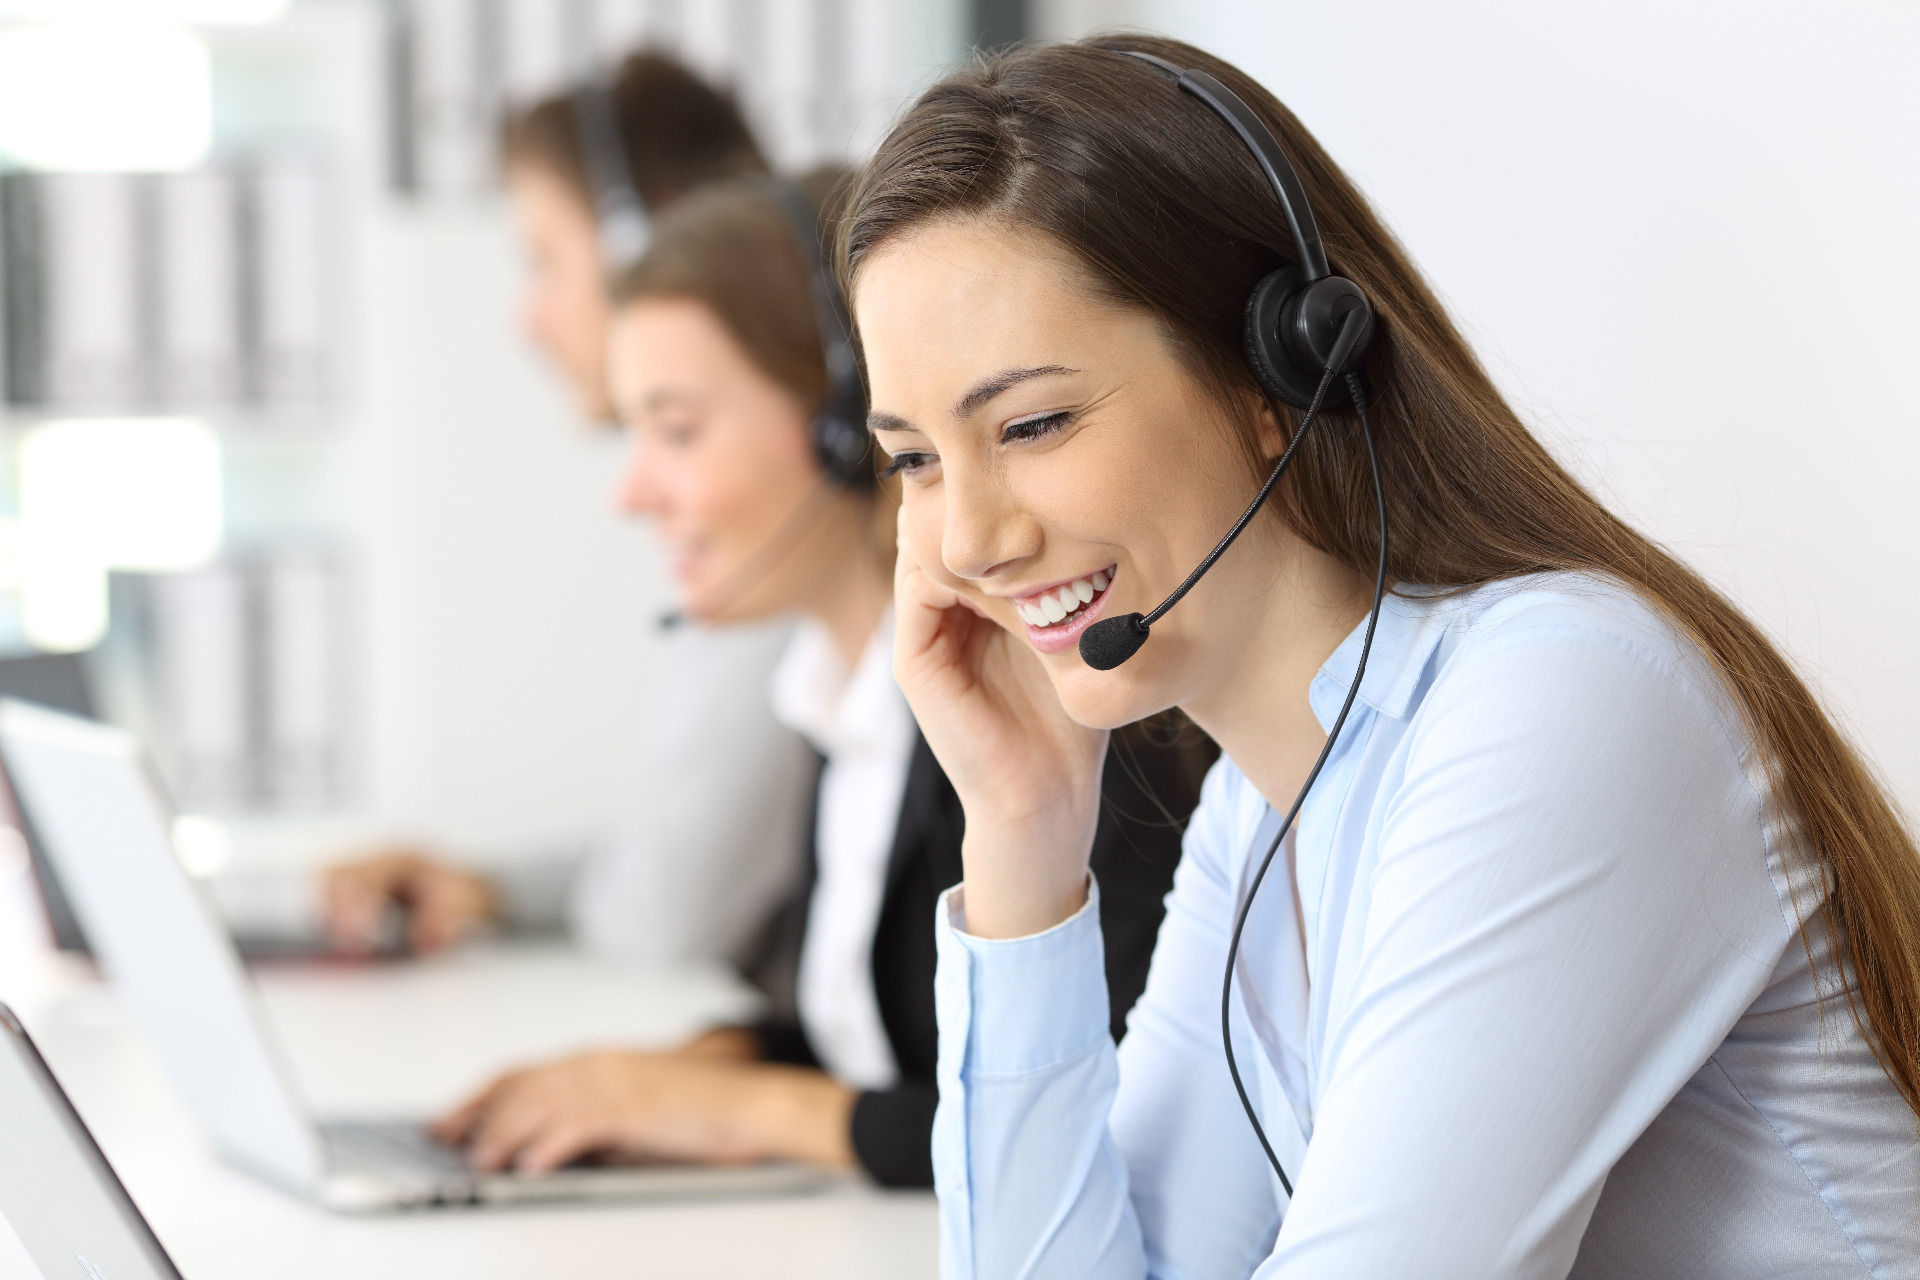 Telemarketing and call center jobs